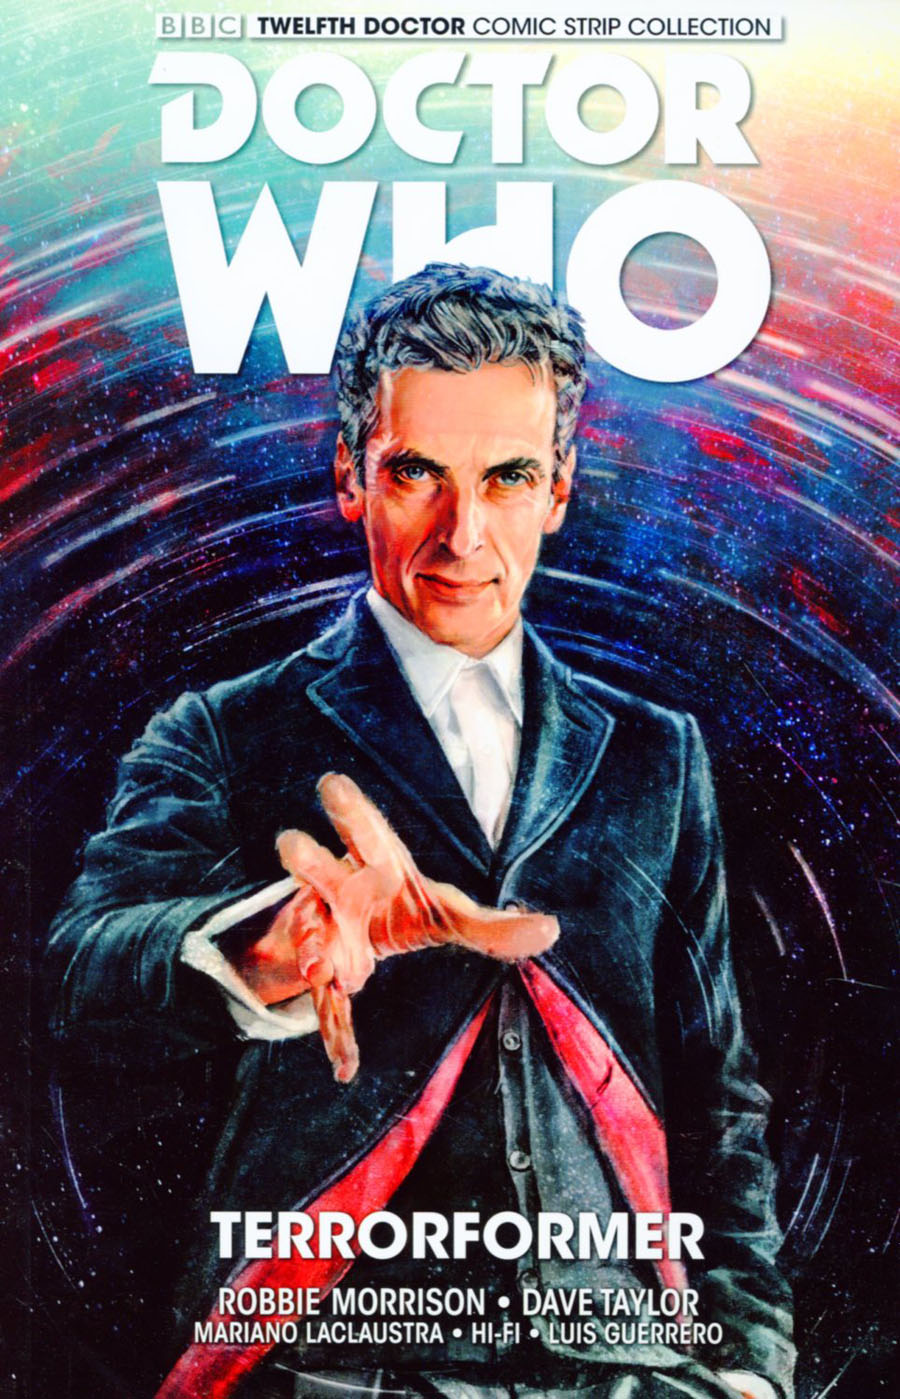 Doctor Who 12th Doctor Vol 1 Terrorformer TP